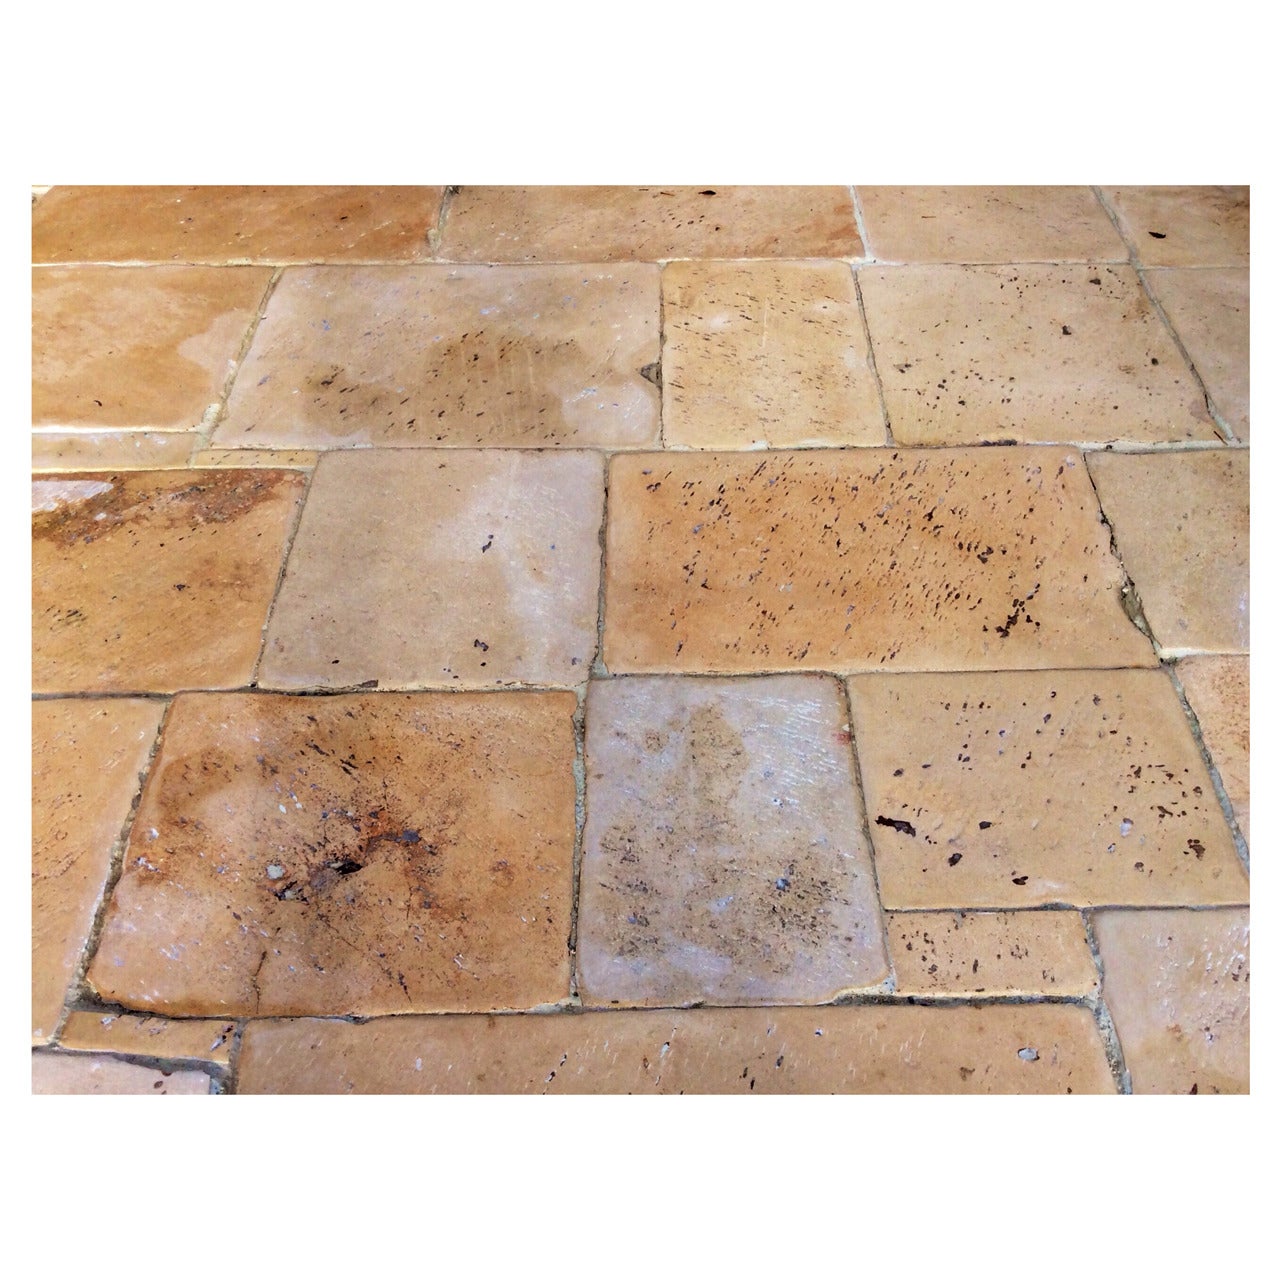 Authentic Provencal French Stone Floors, 16th - 17th Century